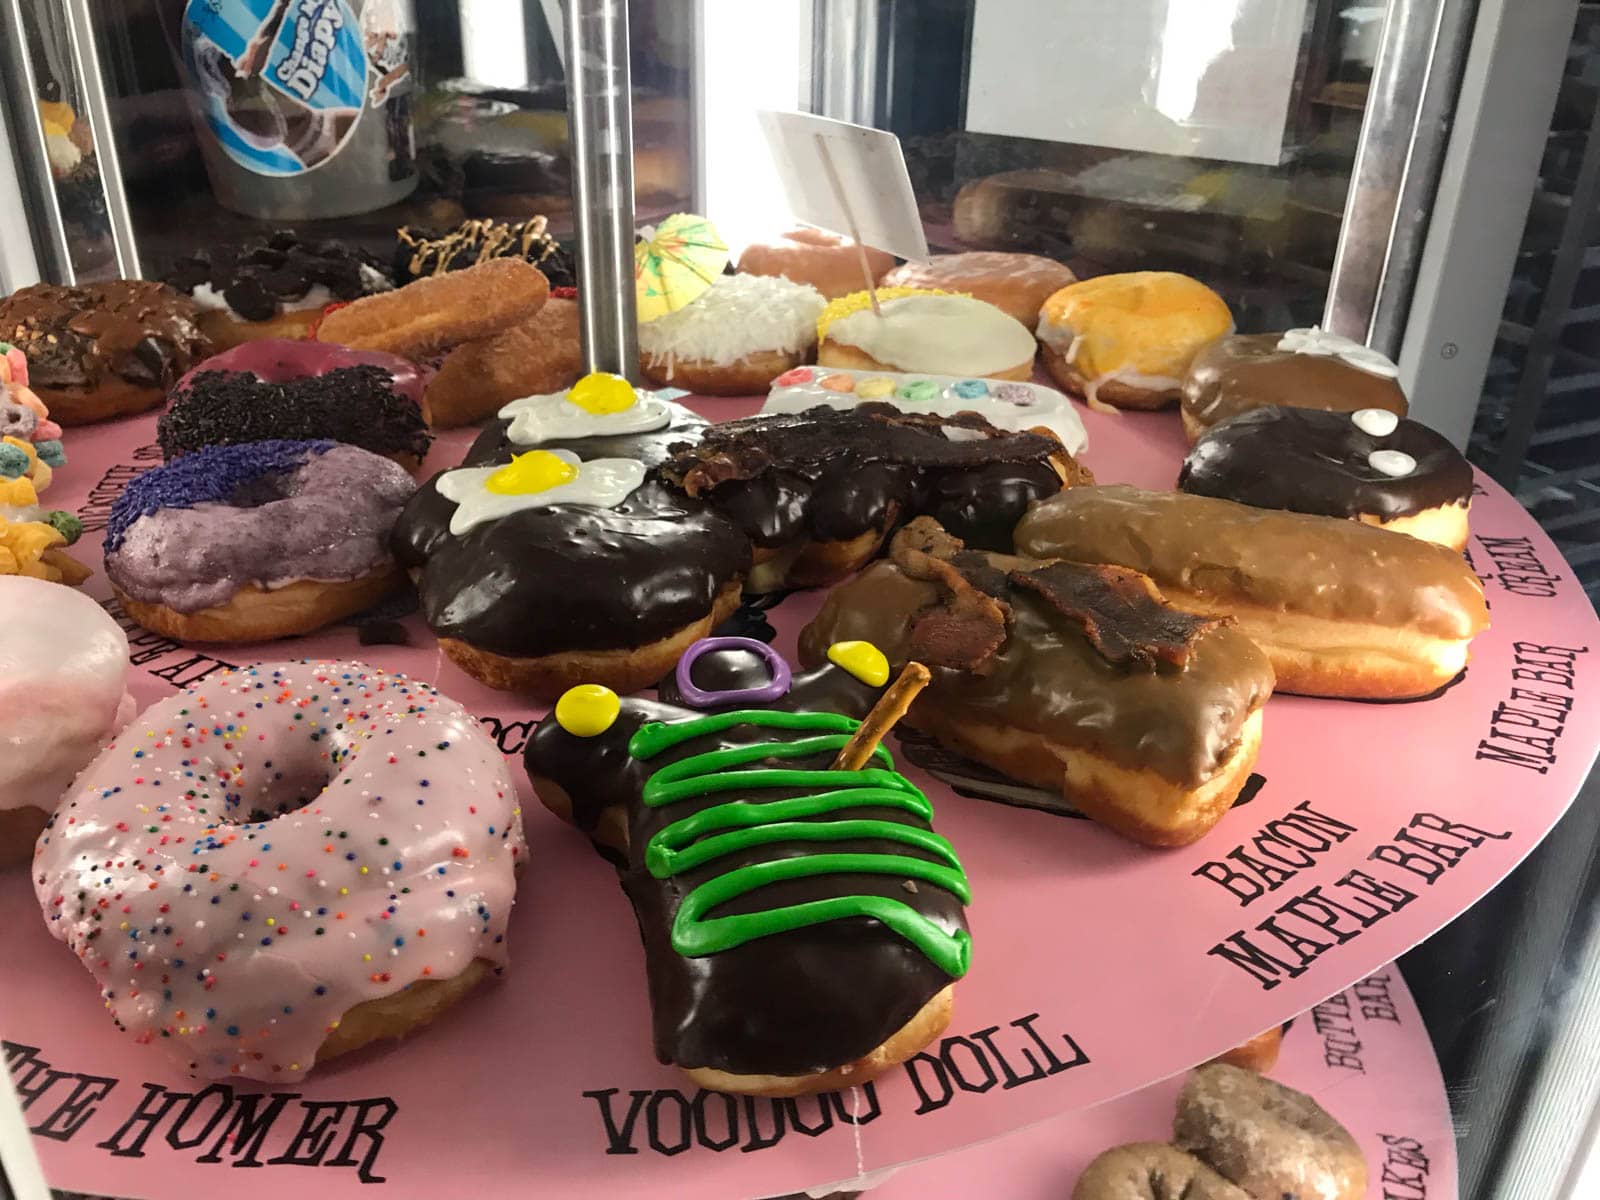 A multi-tier display with pink cardboard plates, with colourfully decorated doughnuts on them. The doughnuts are labelled by text printed on the pink cardboard.